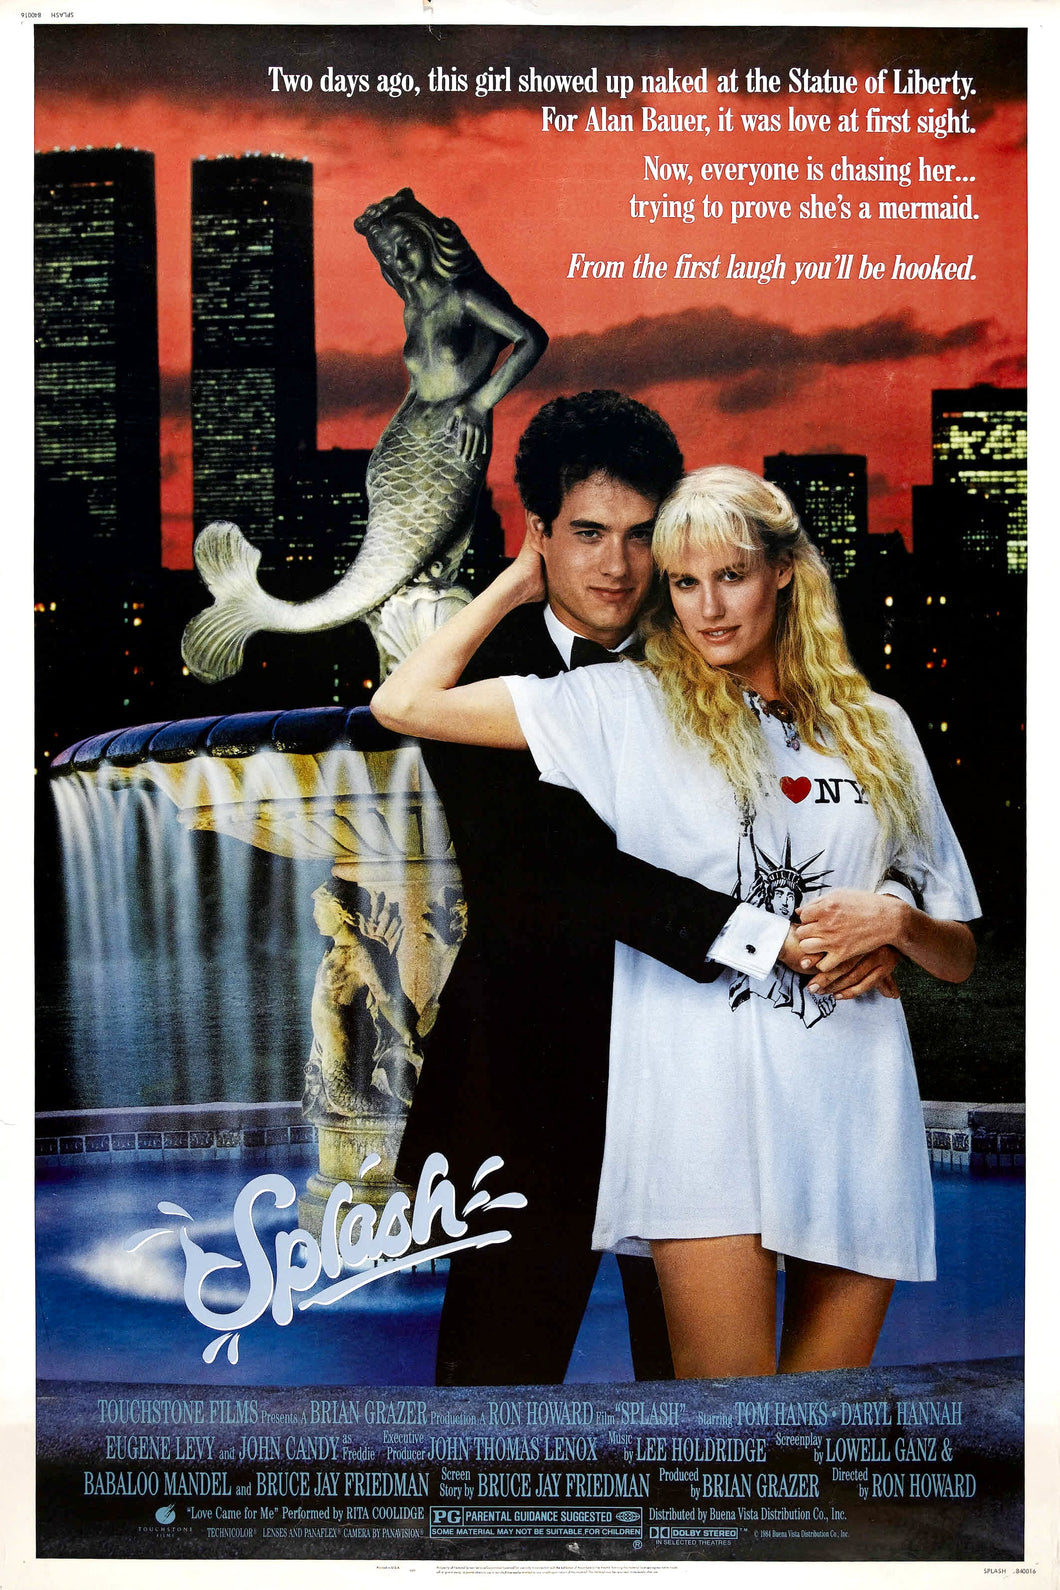 Splash (1984) Movie Poster High Quality Glossy Paper A1 A2 A3 A4 A3 Framed or Unframed!!!